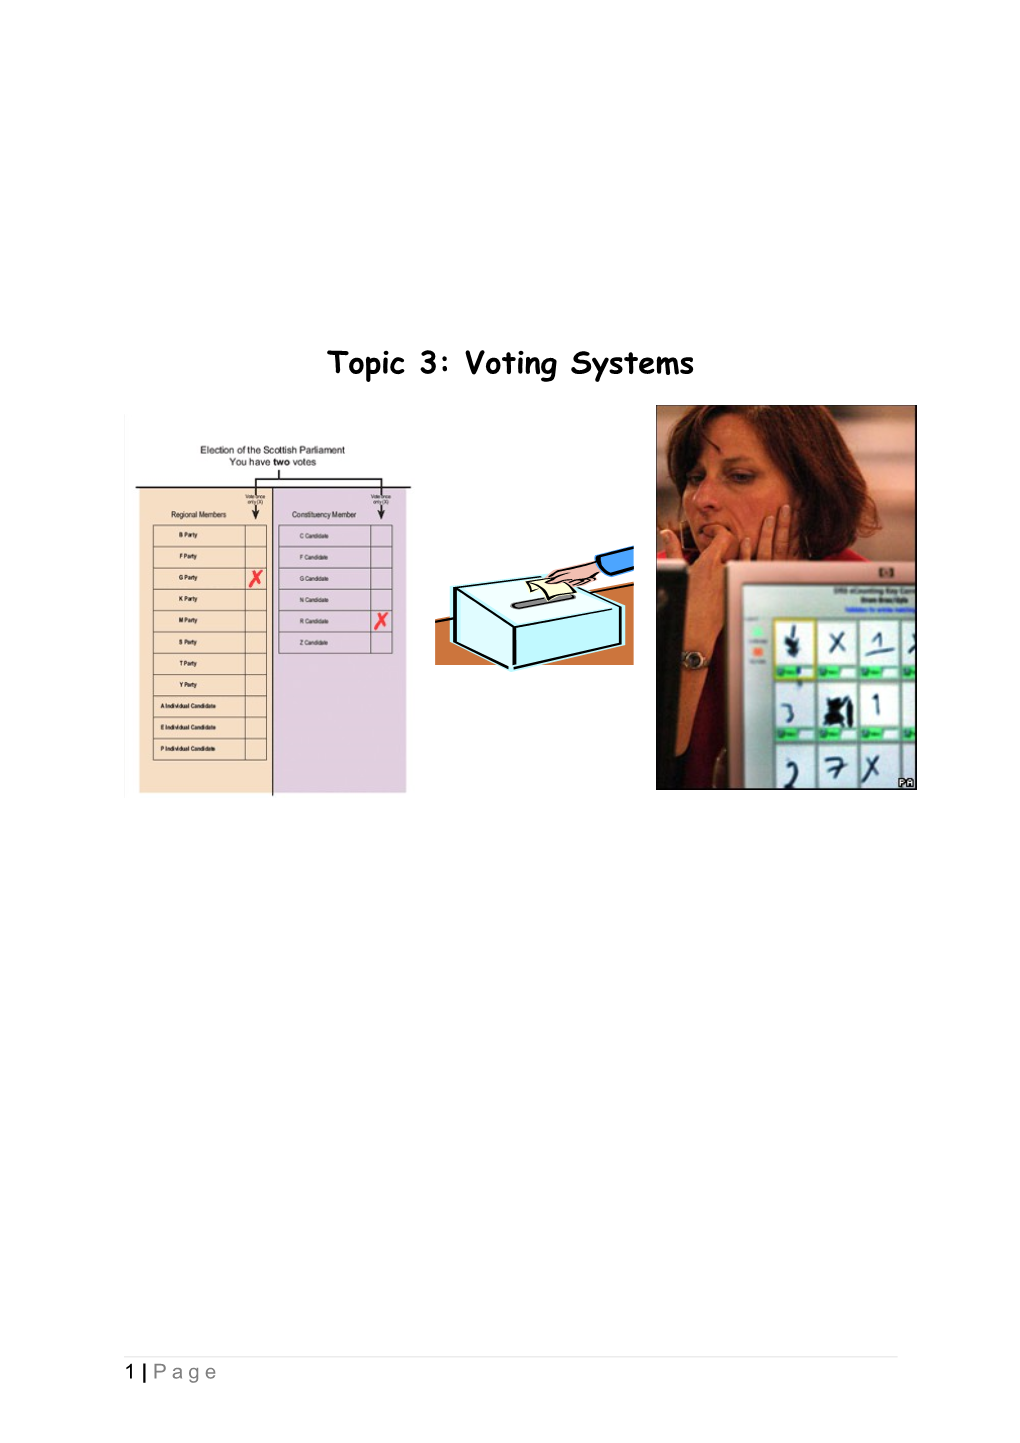 Topic 3: Voting Systems